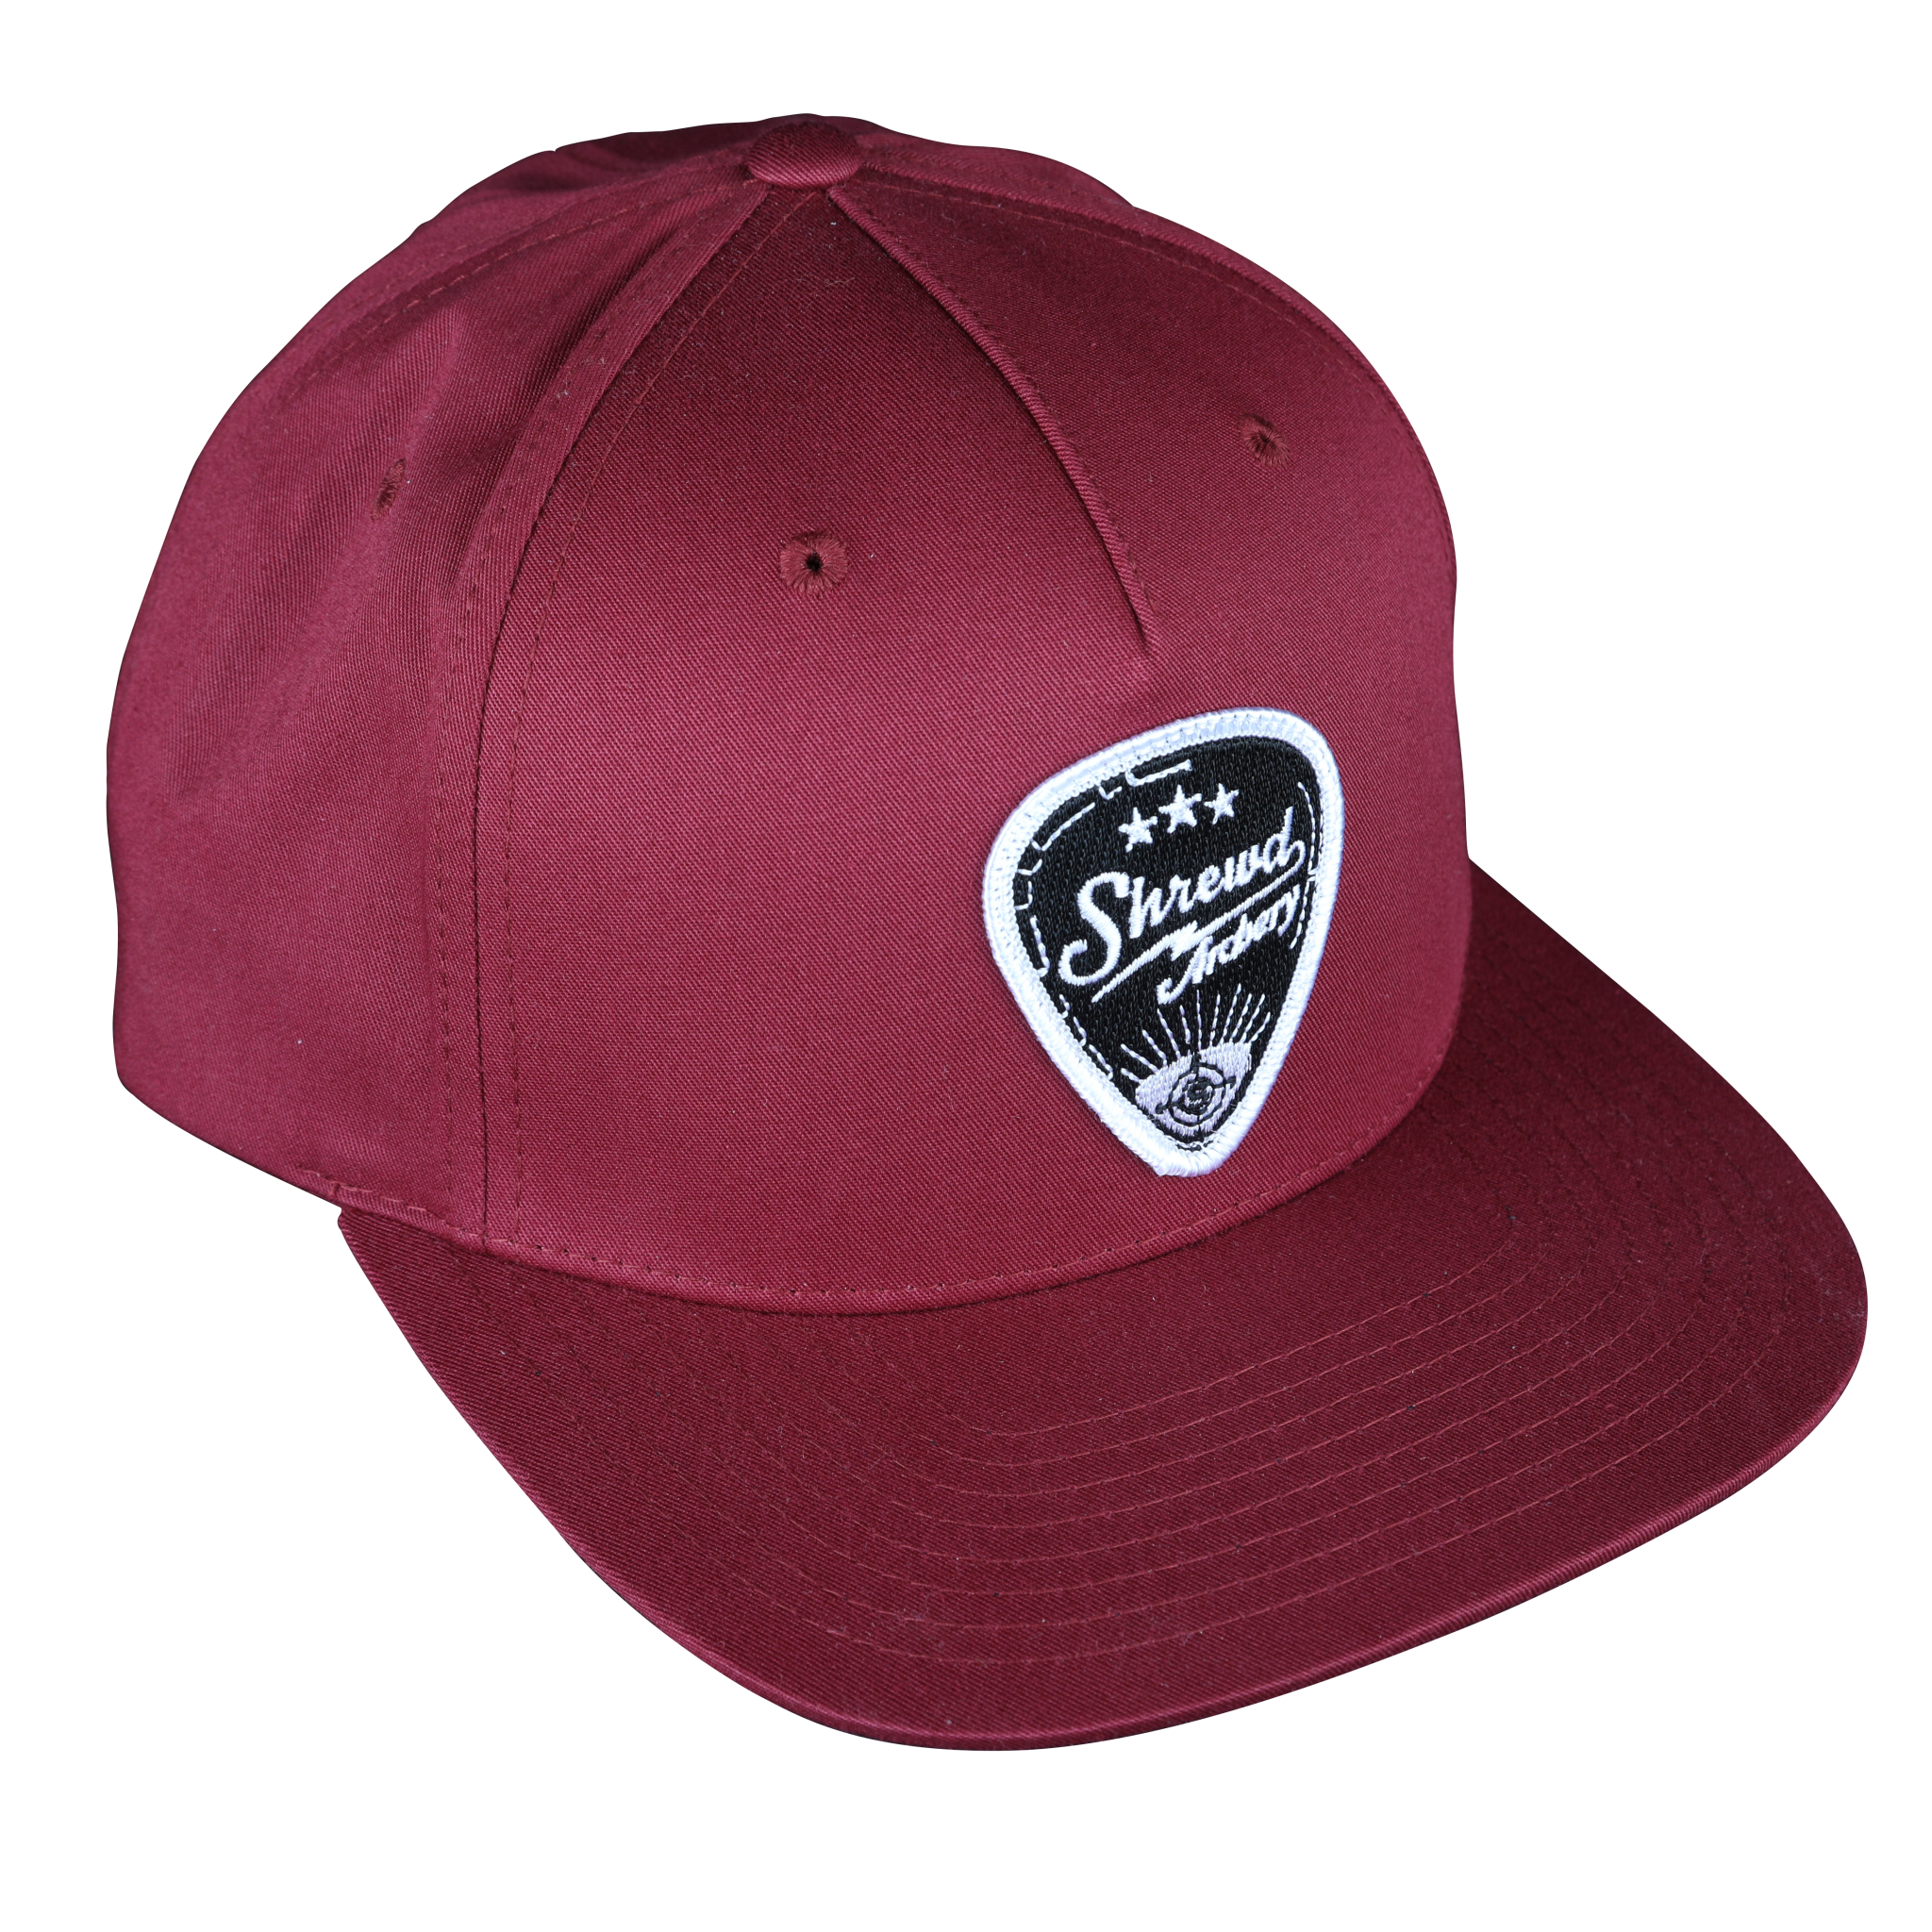 Pick Hat - Red Berry